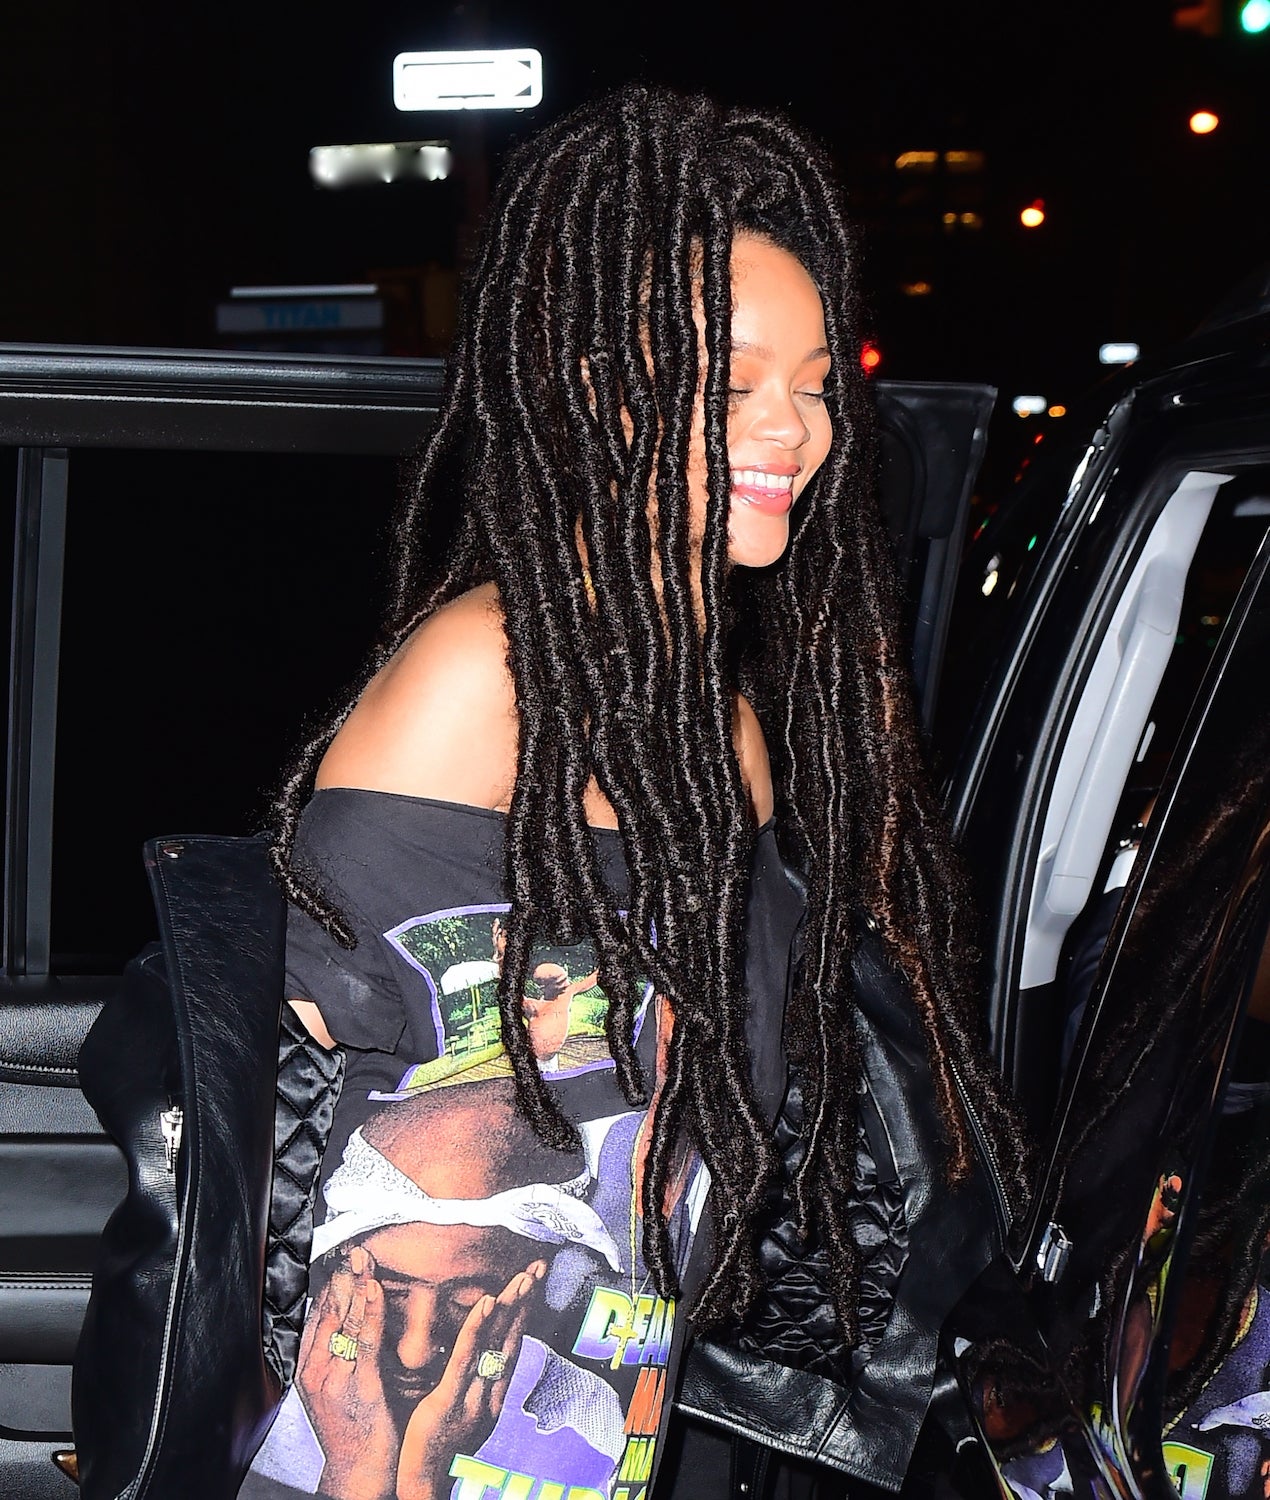 You'll Want Faux Locs After Seeing These Pictures of Rihanna
